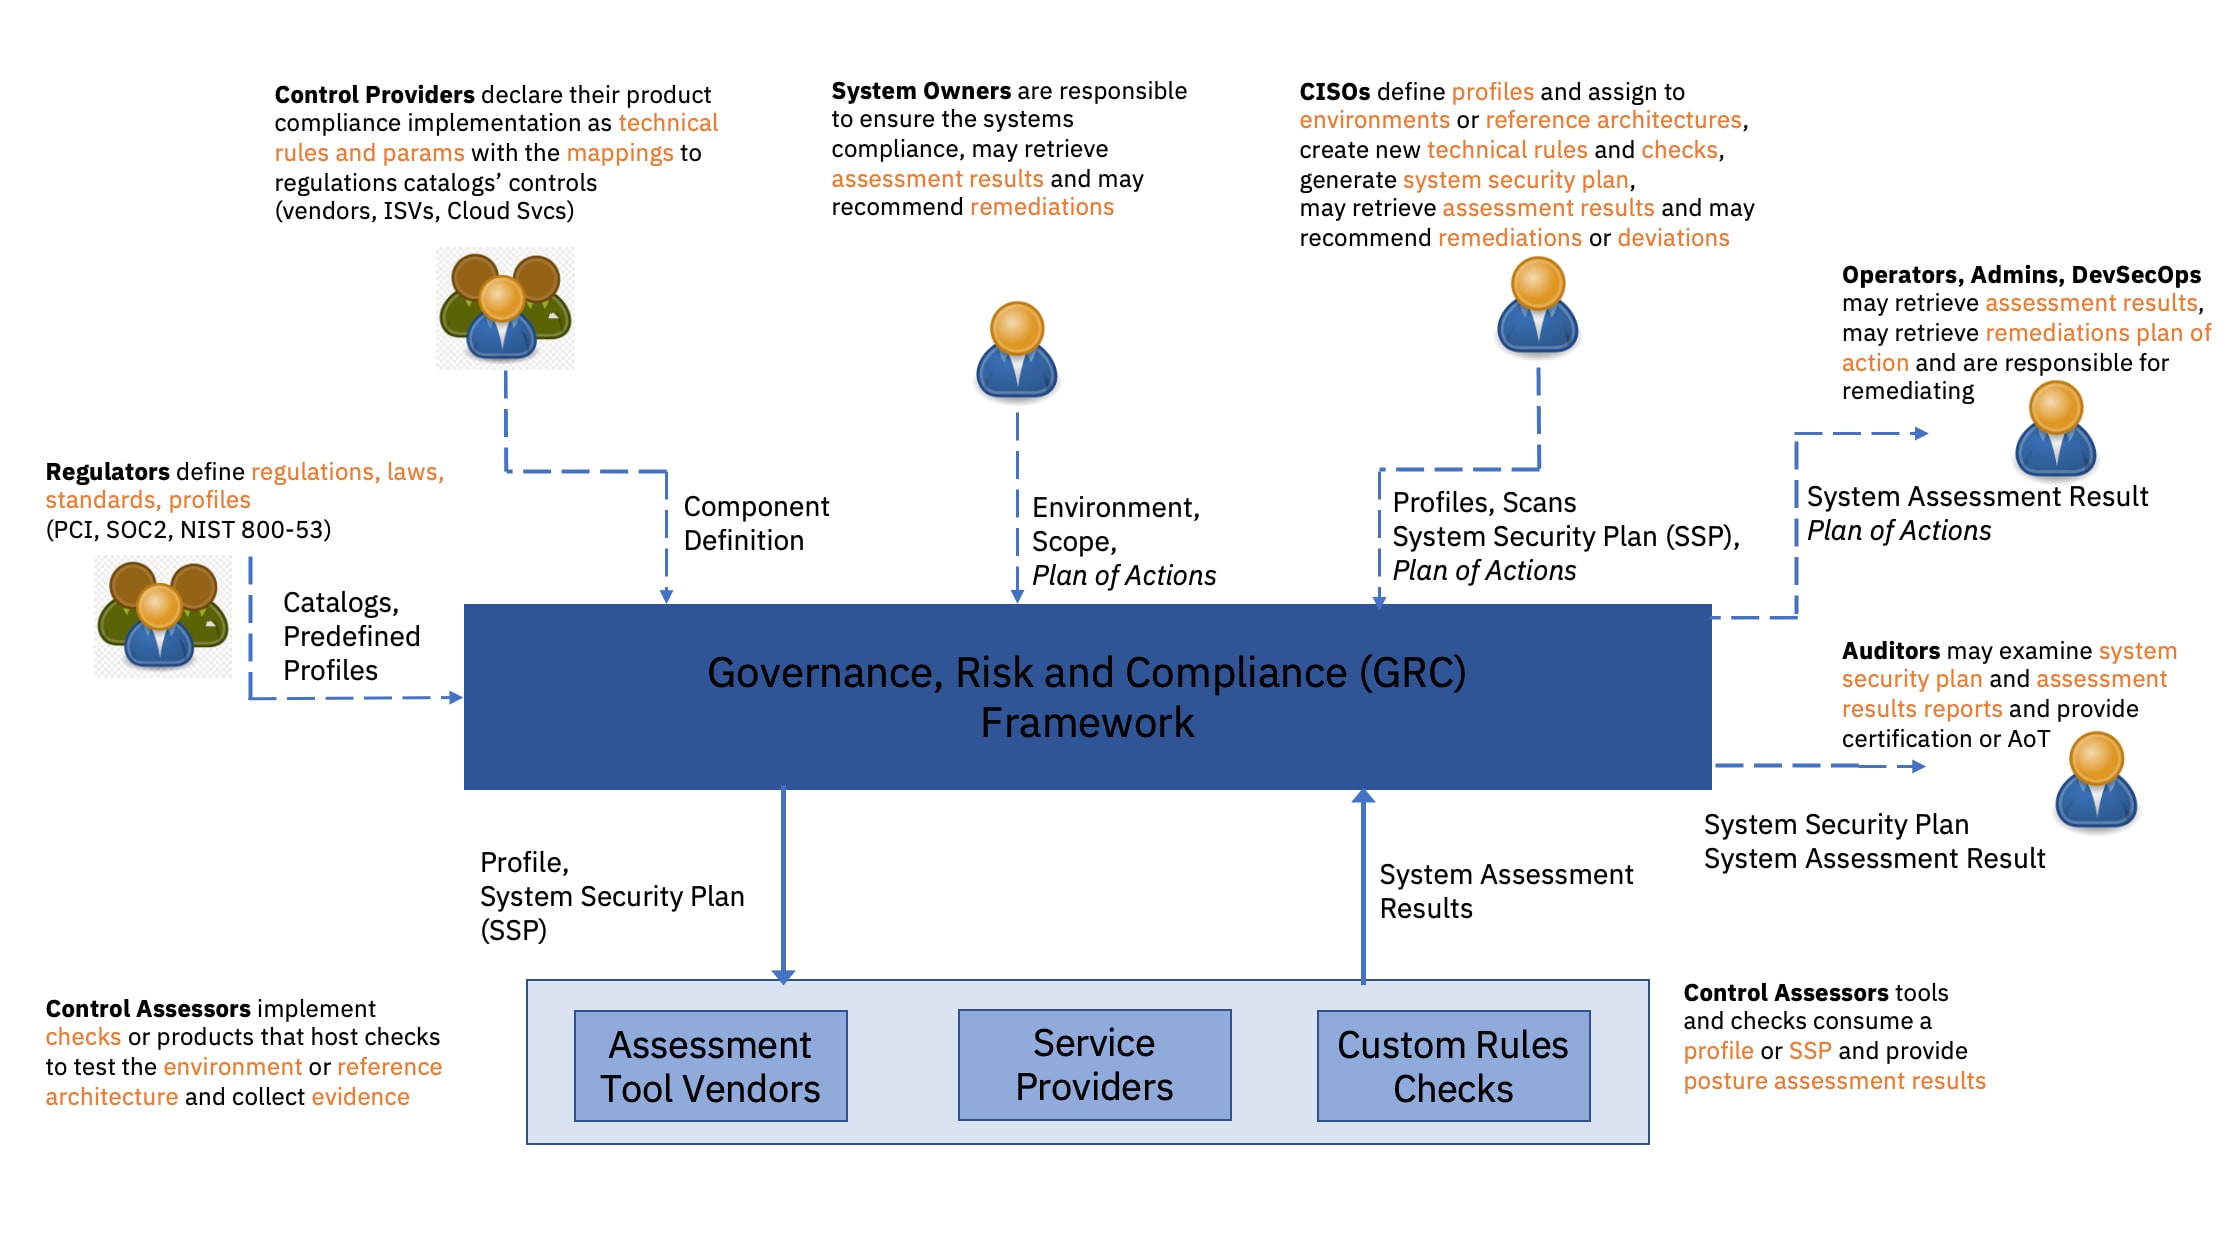 Figure 1: Compliance stakeholders actions in the Governance, Risk and Compliance management framework